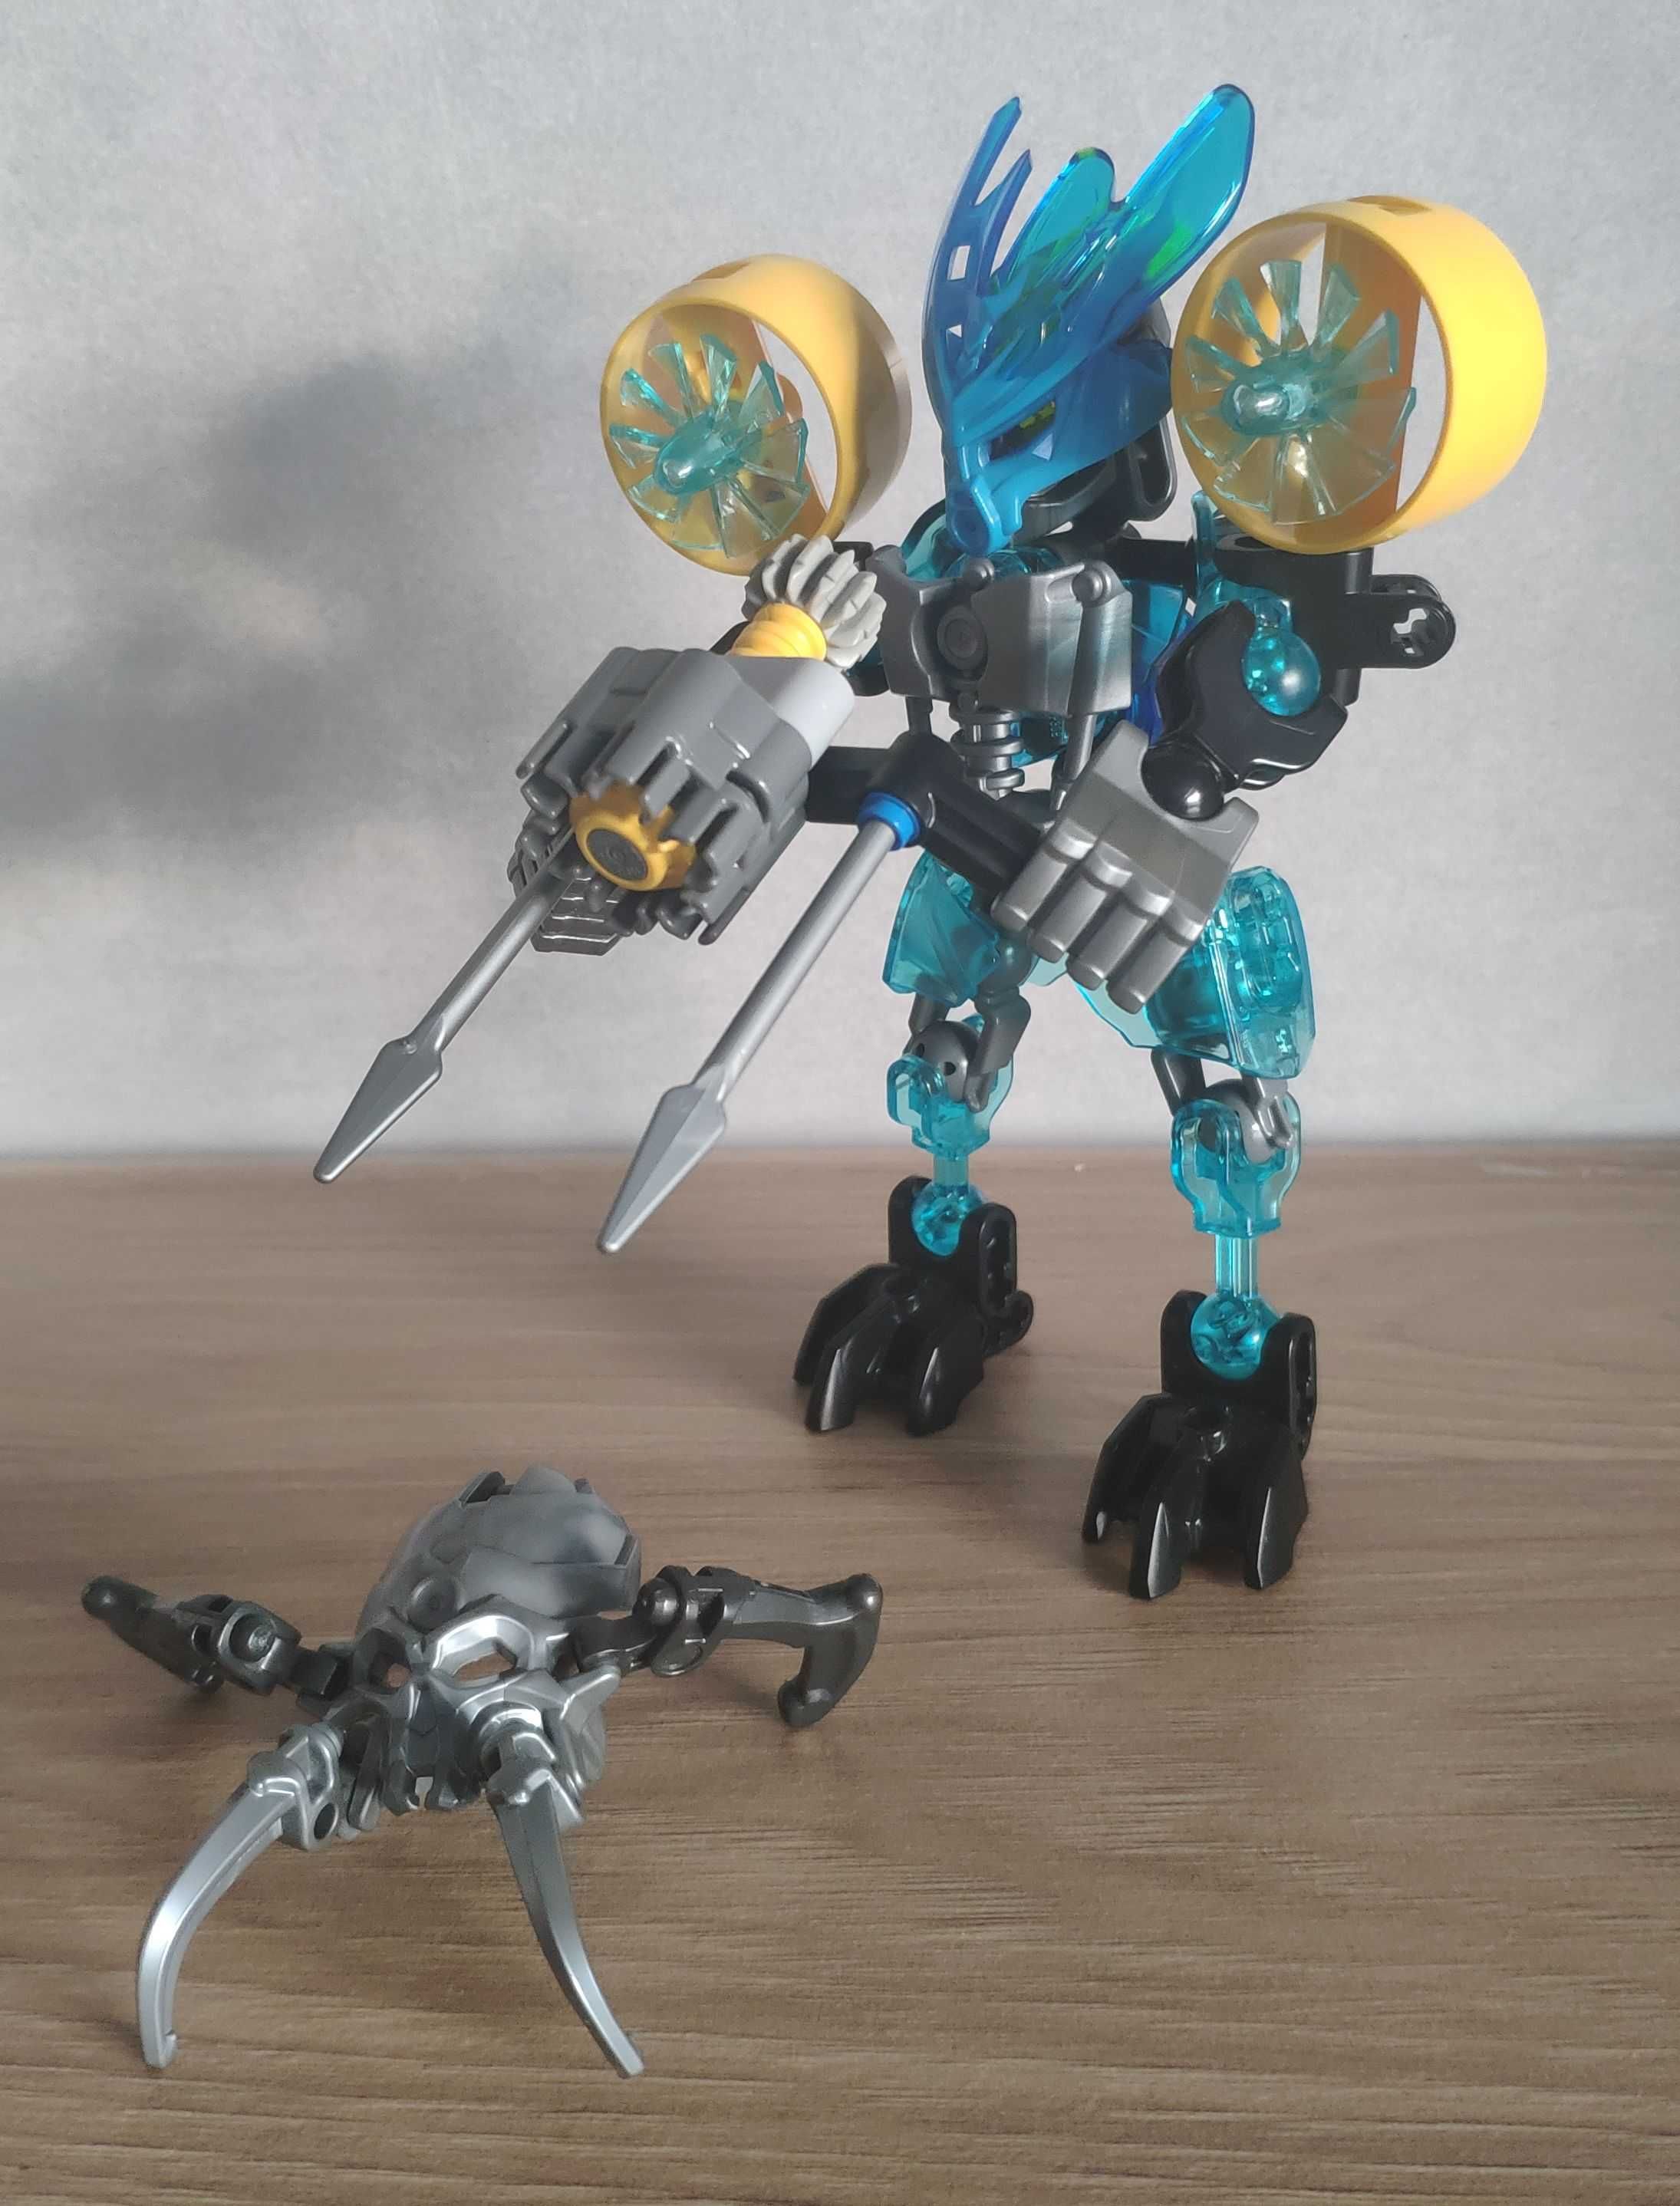 LEGO Bionicle 70780 Protector of Water